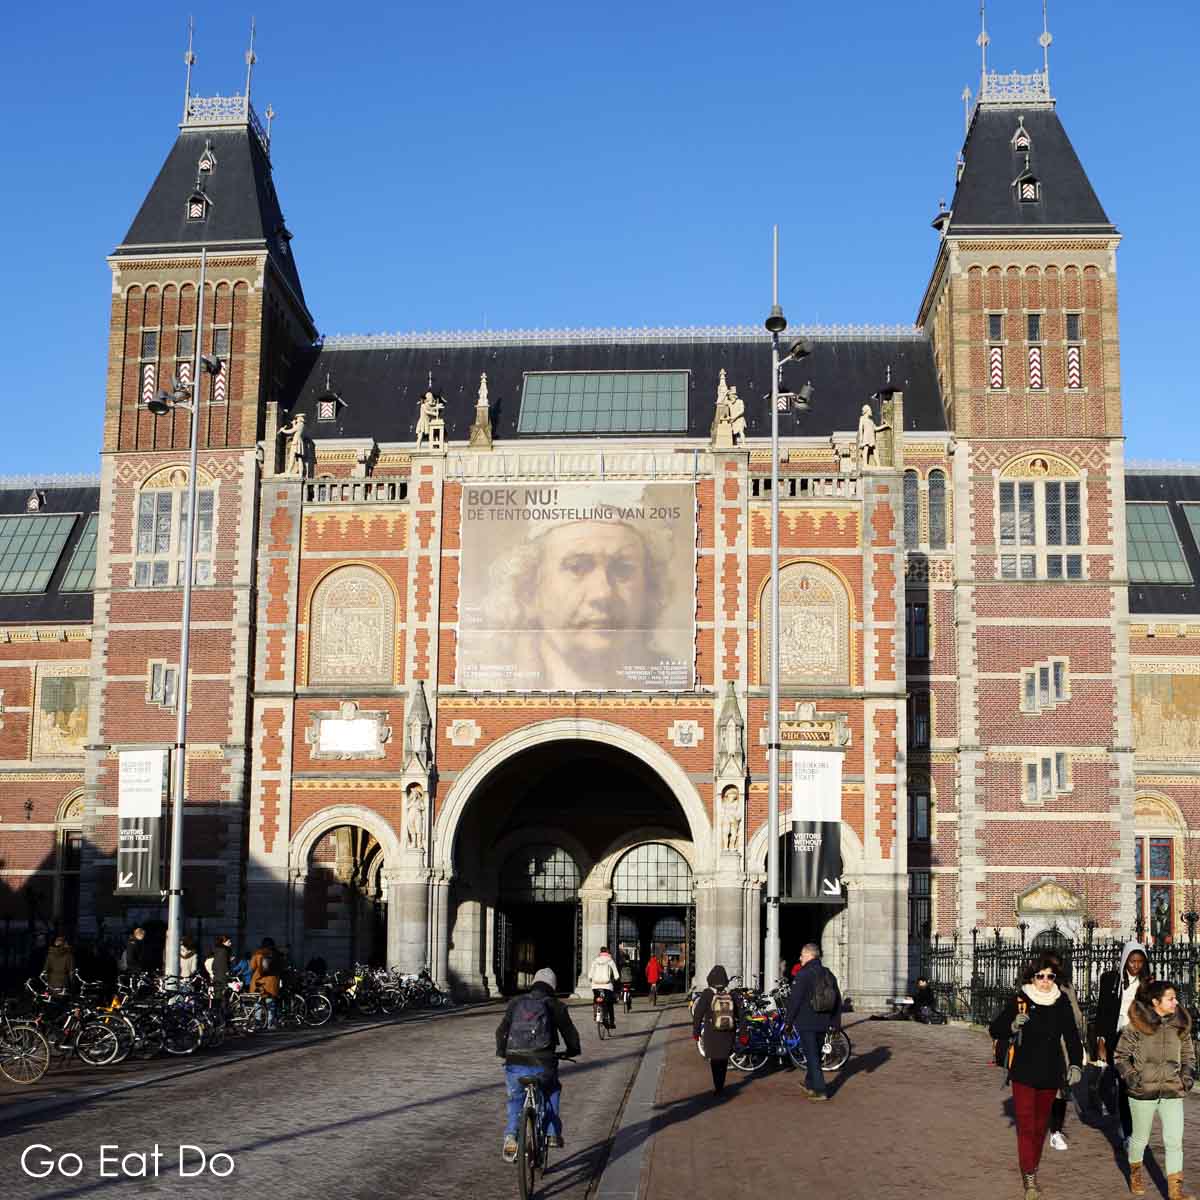 Facade of the Rijksmuseum in Amsterdam, the Netherlands' national museum, which exhibits a broad selection of Dutch Golden Age masterpieces.